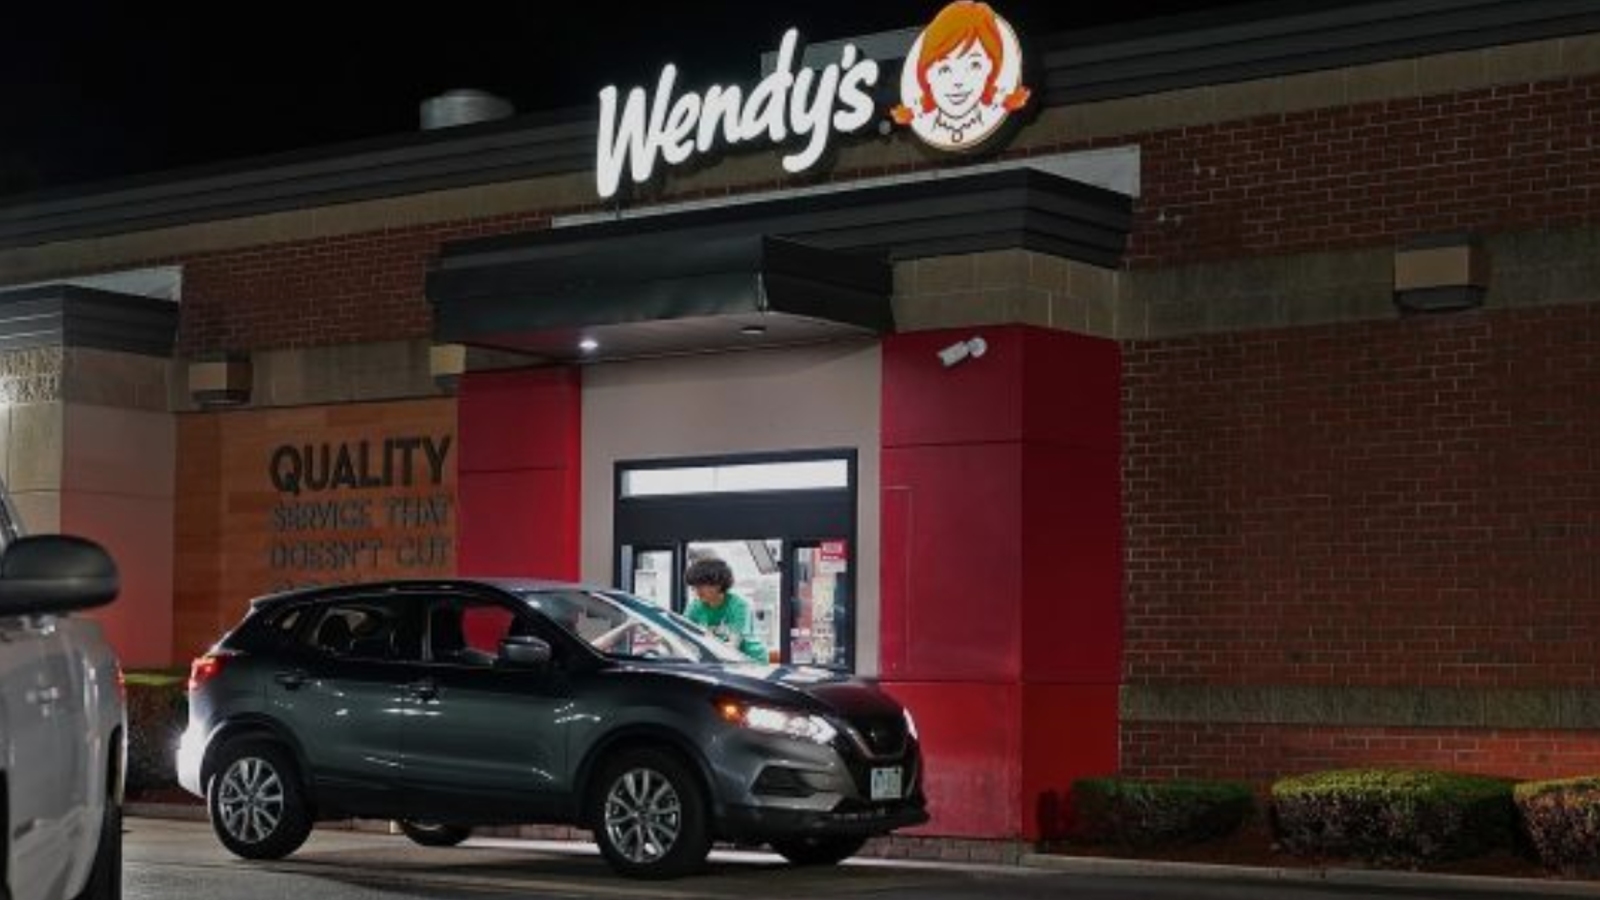 Wendy’s AI drive-thru is going viral and sparking fears about the AI takeover